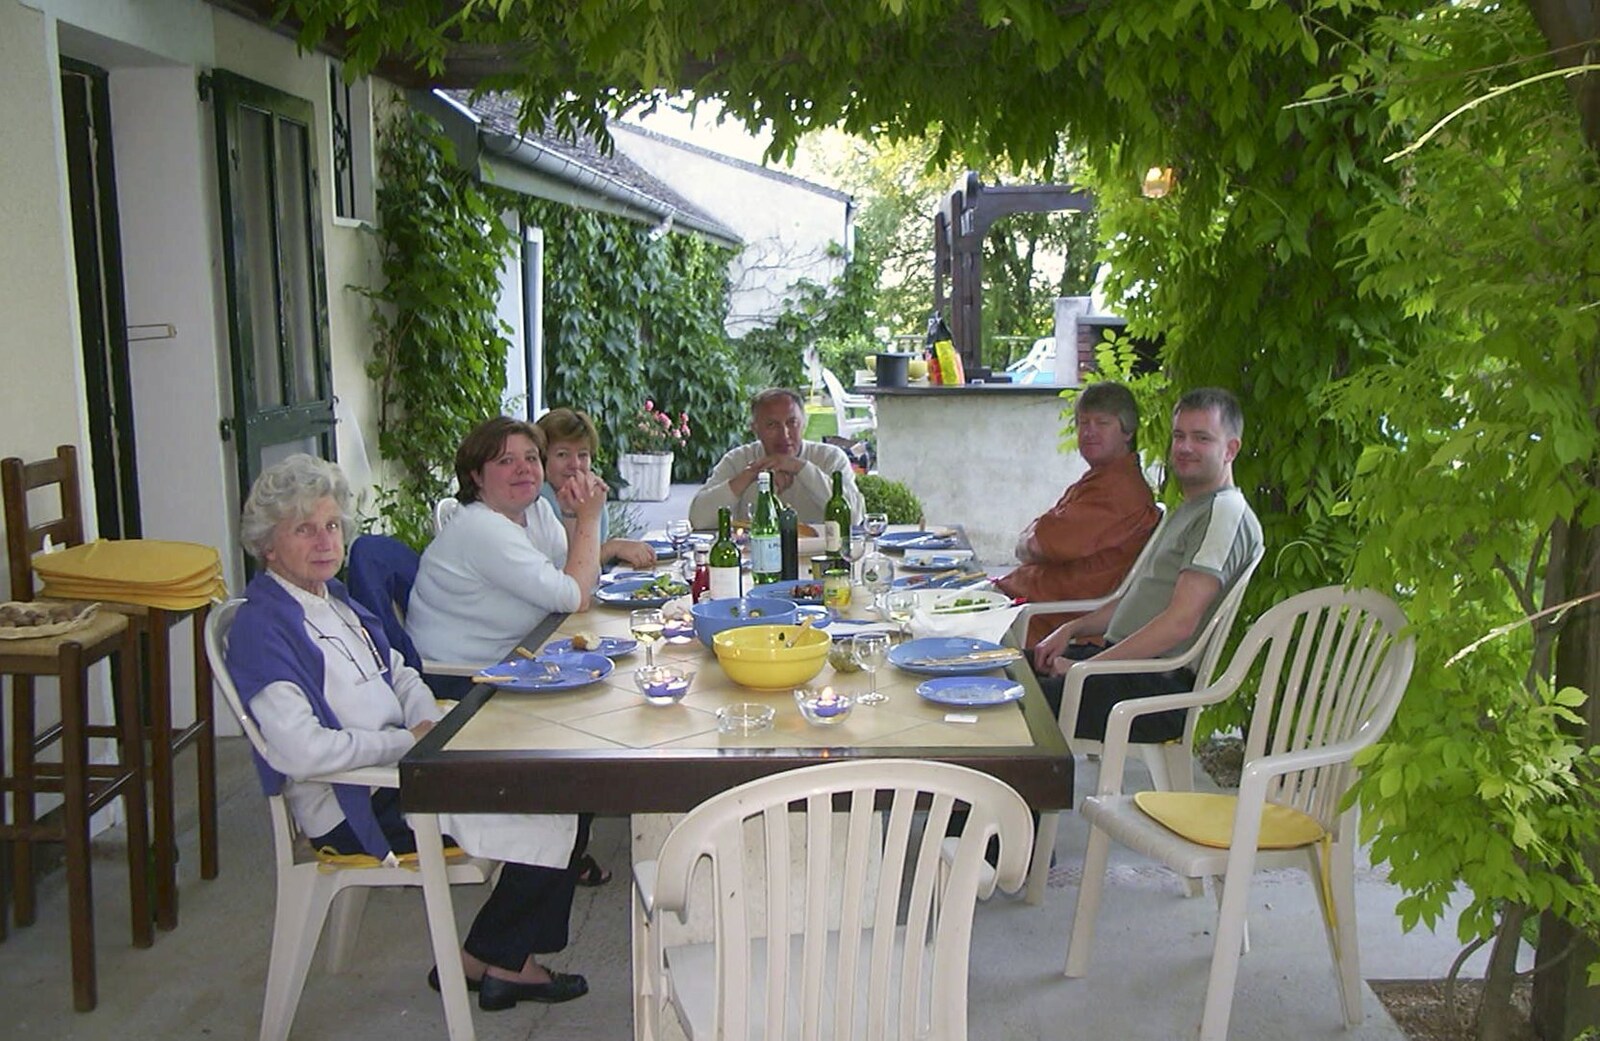 Nosher around the table from A Short Holiday in Chivres, Burgundy, France - 21st July 2001